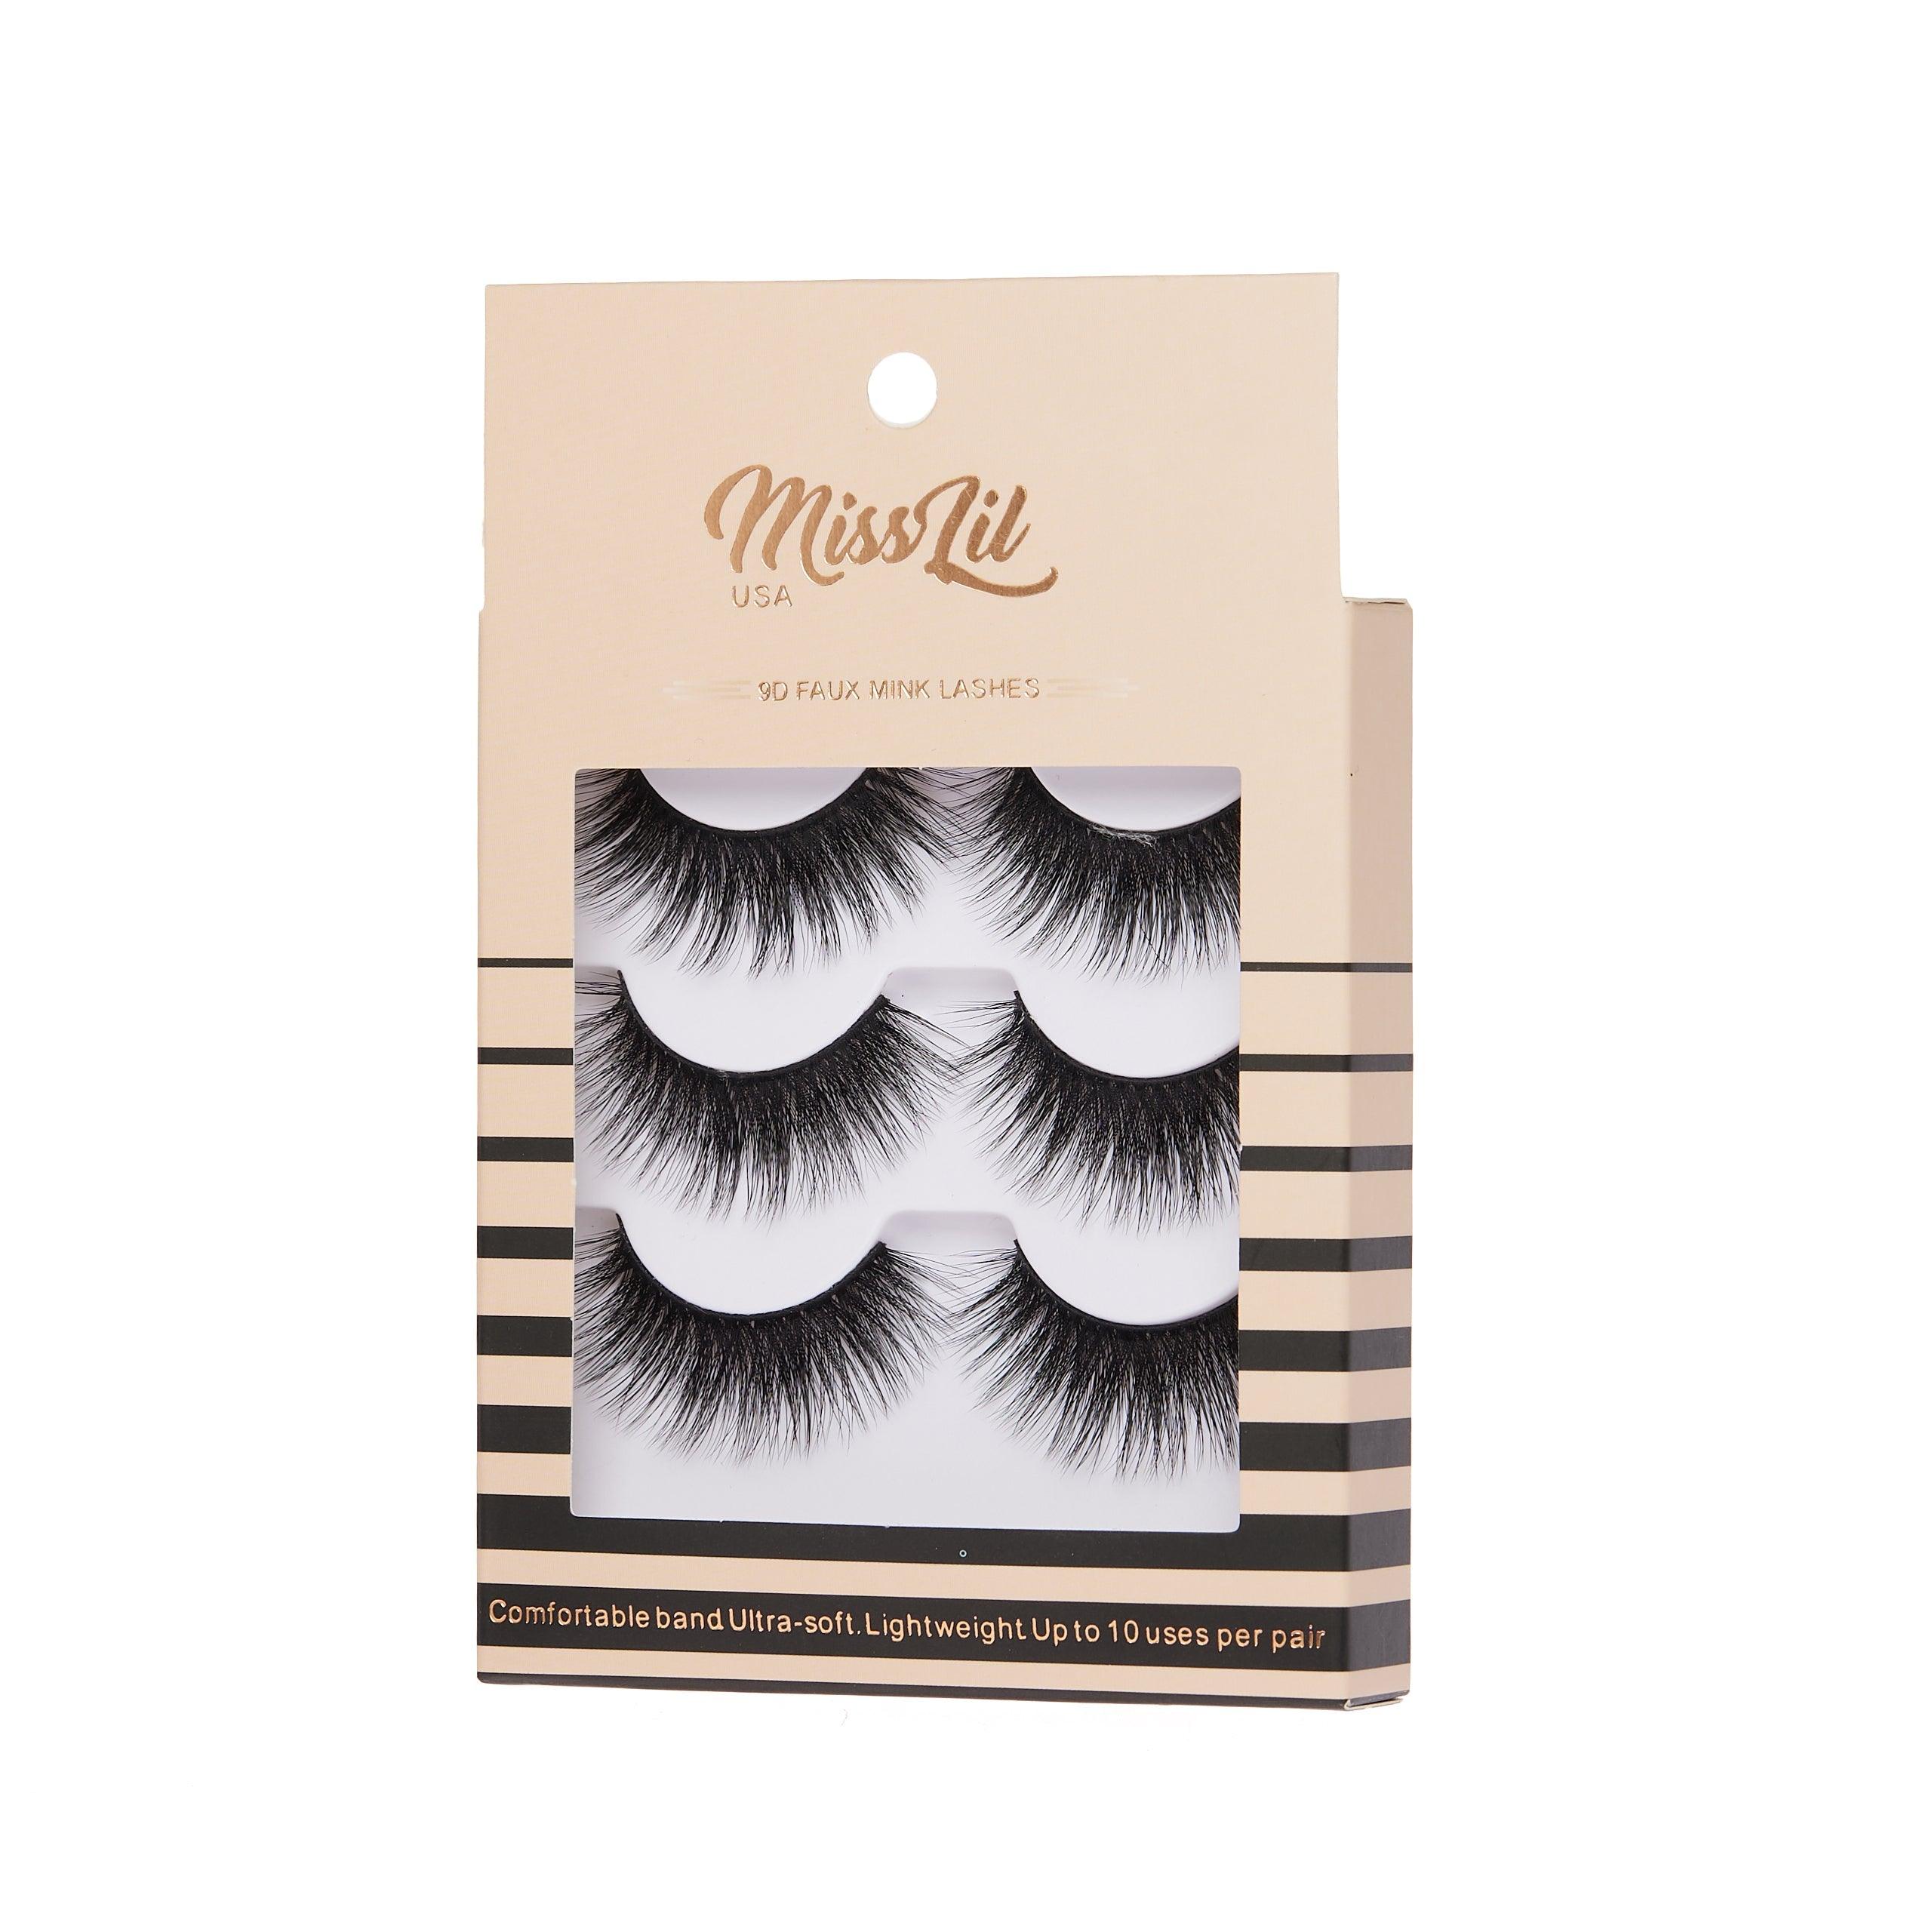 3-Pair Faux 9D Mink Eyelashes - Luxury Collection #25 - Pack of 12 - Miss Lil USA